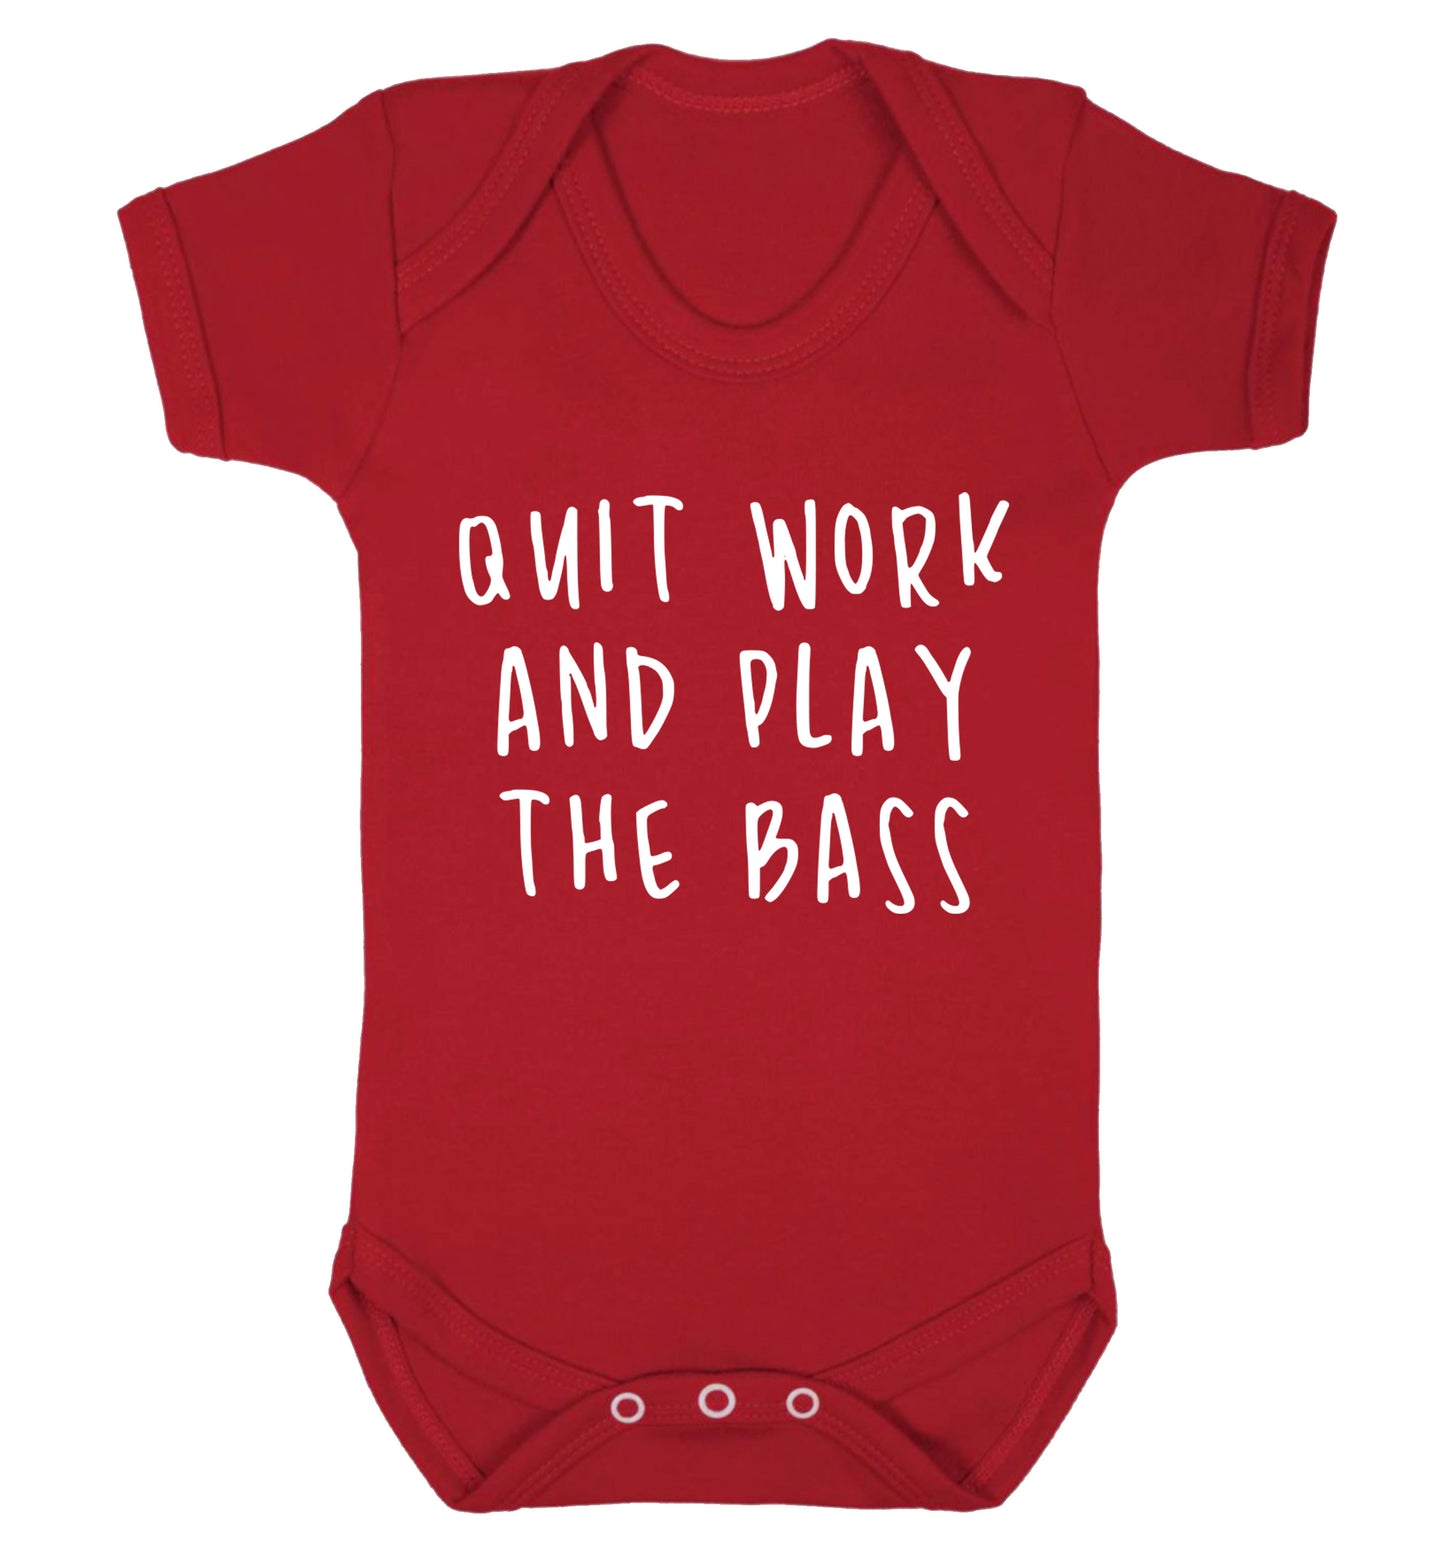 Quit work and play the bass Baby Vest red 18-24 months